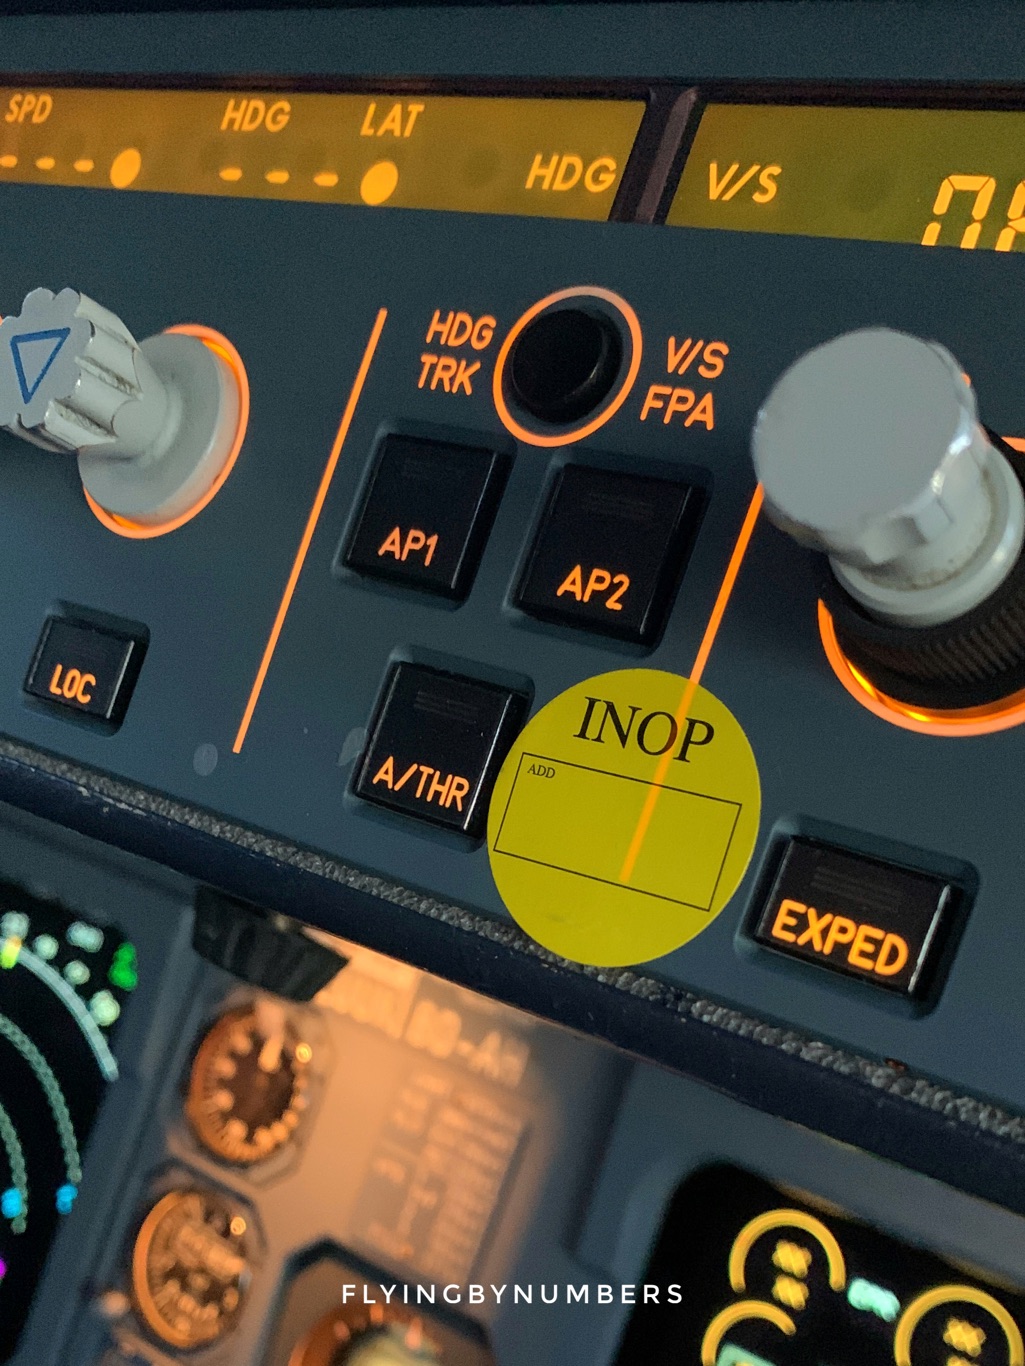 An inoperative autopilot in a commercial aircraft